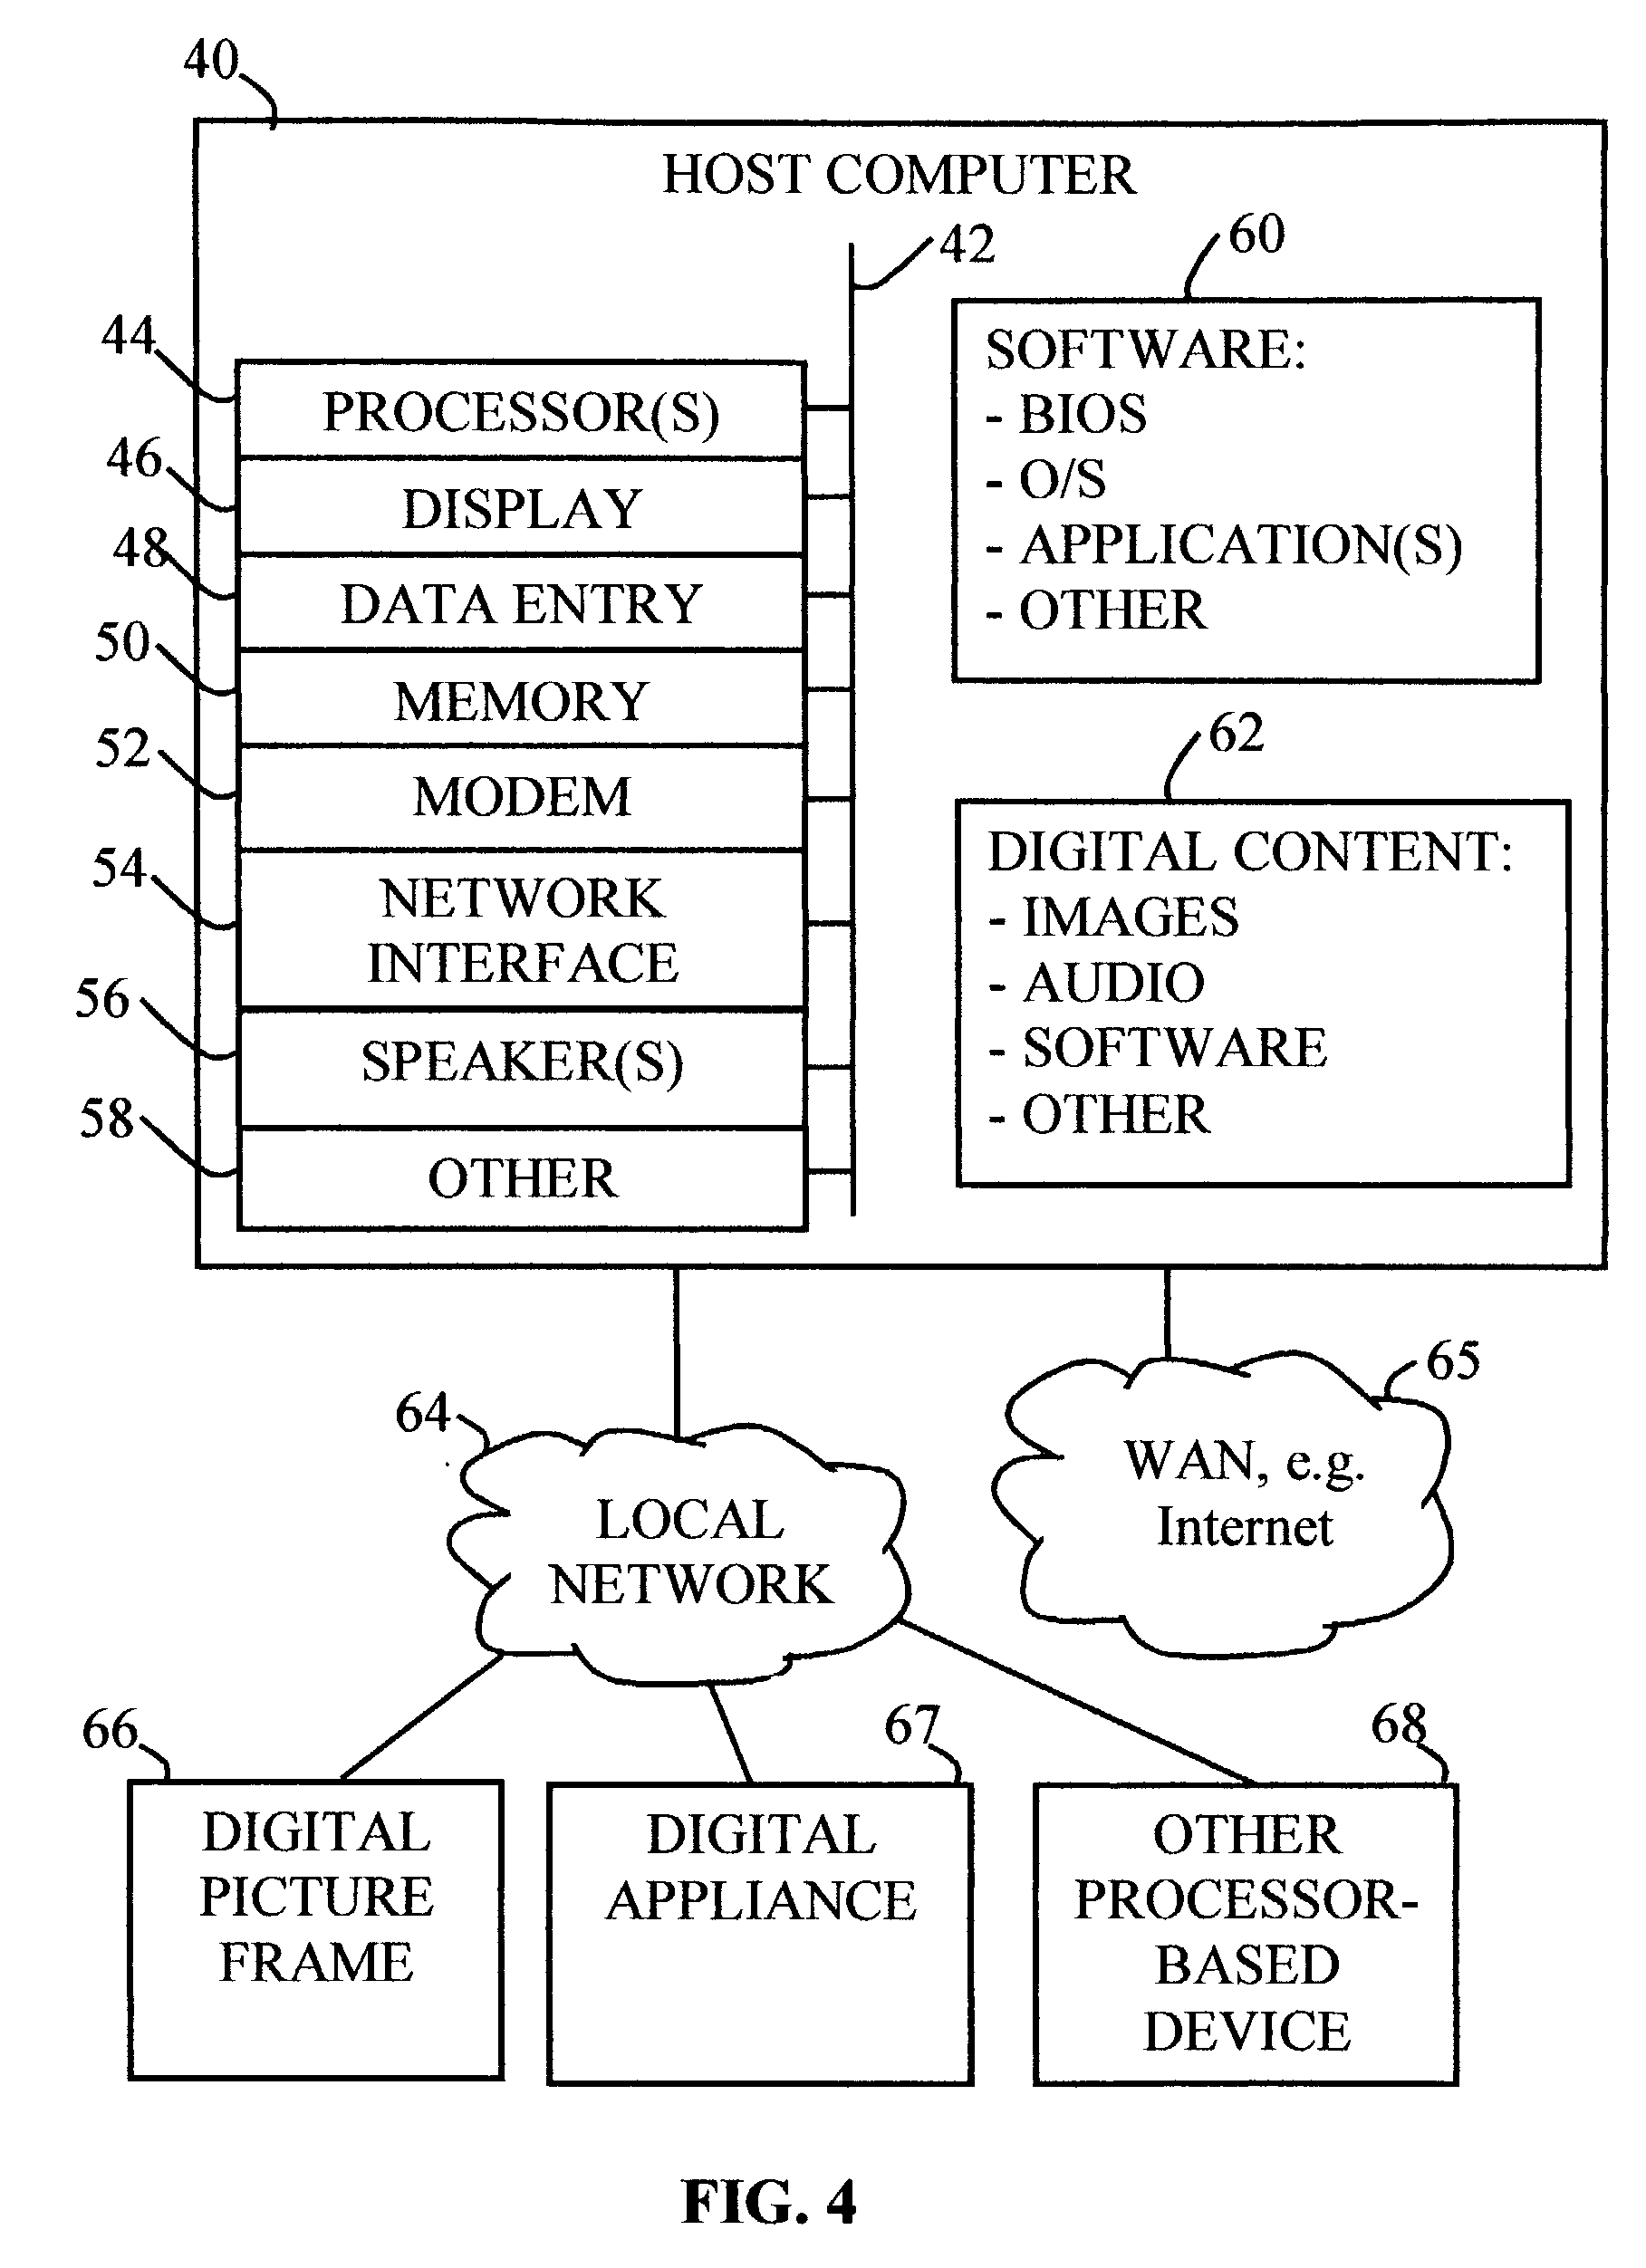 Apparatus and methods to exchange menu information among processor-based devices